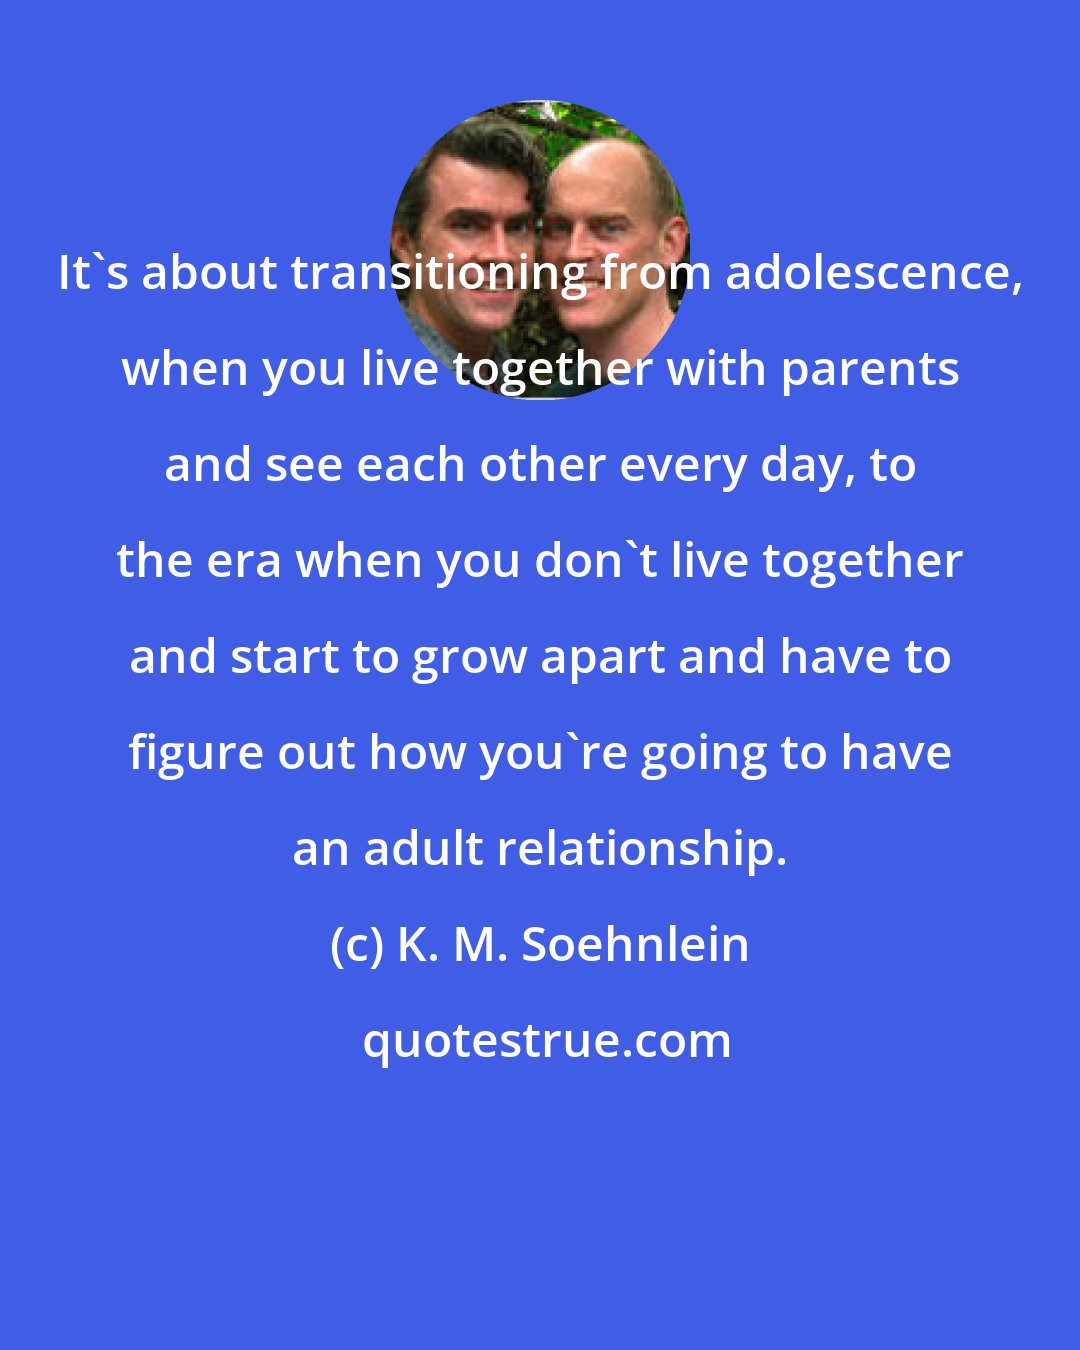 K. M. Soehnlein: It's about transitioning from adolescence, when you live together with parents and see each other every day, to the era when you don't live together and start to grow apart and have to figure out how you're going to have an adult relationship.